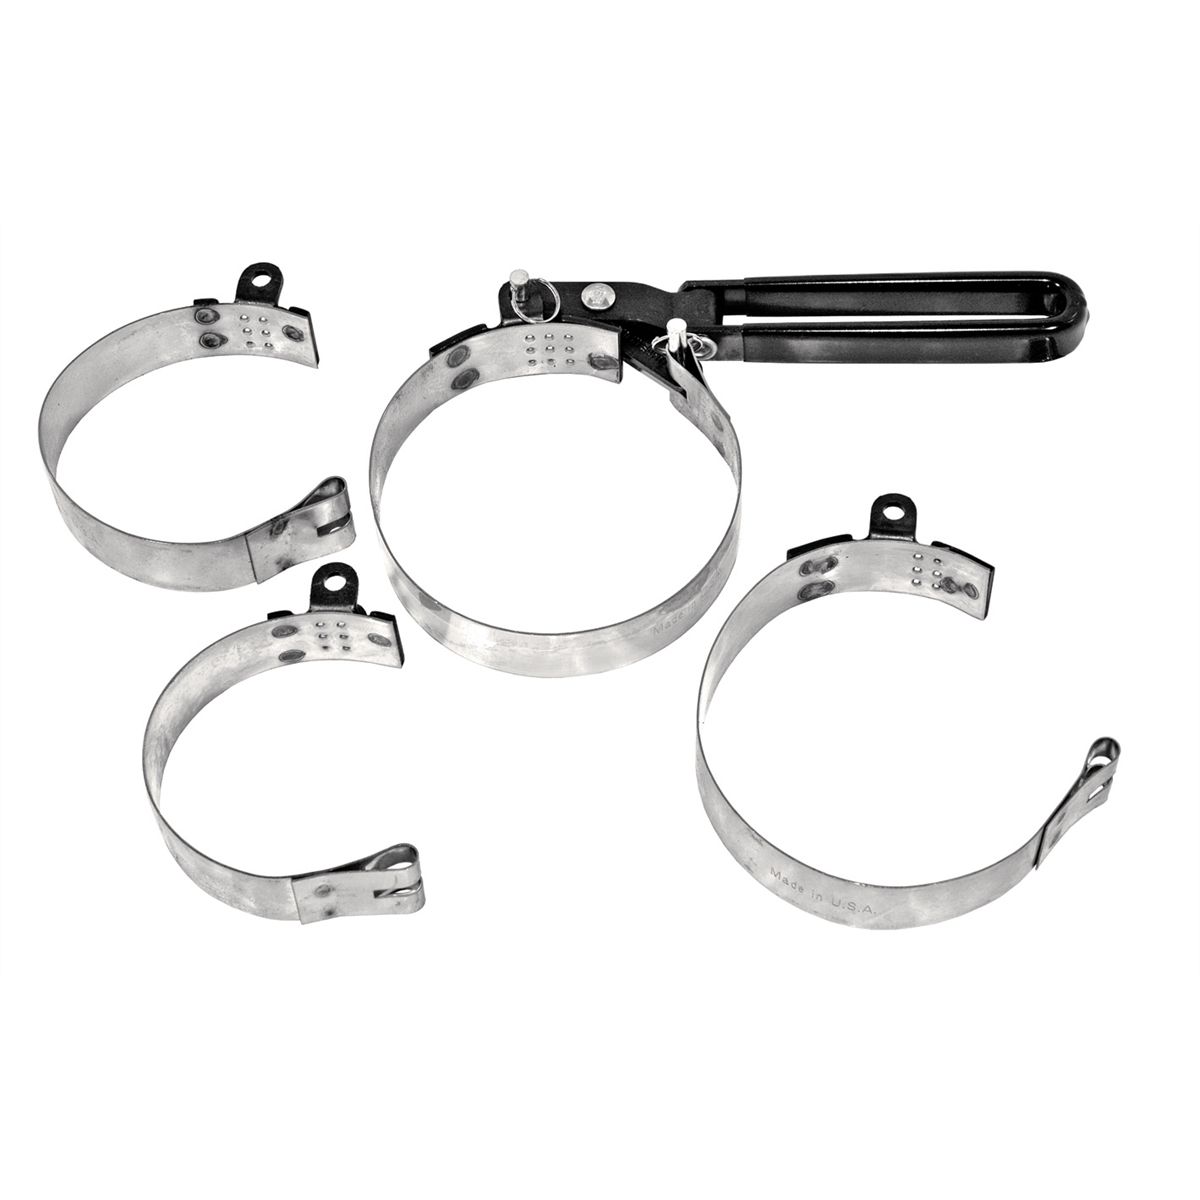 4 Piece Interchangeable Oil Filter Wrench Set